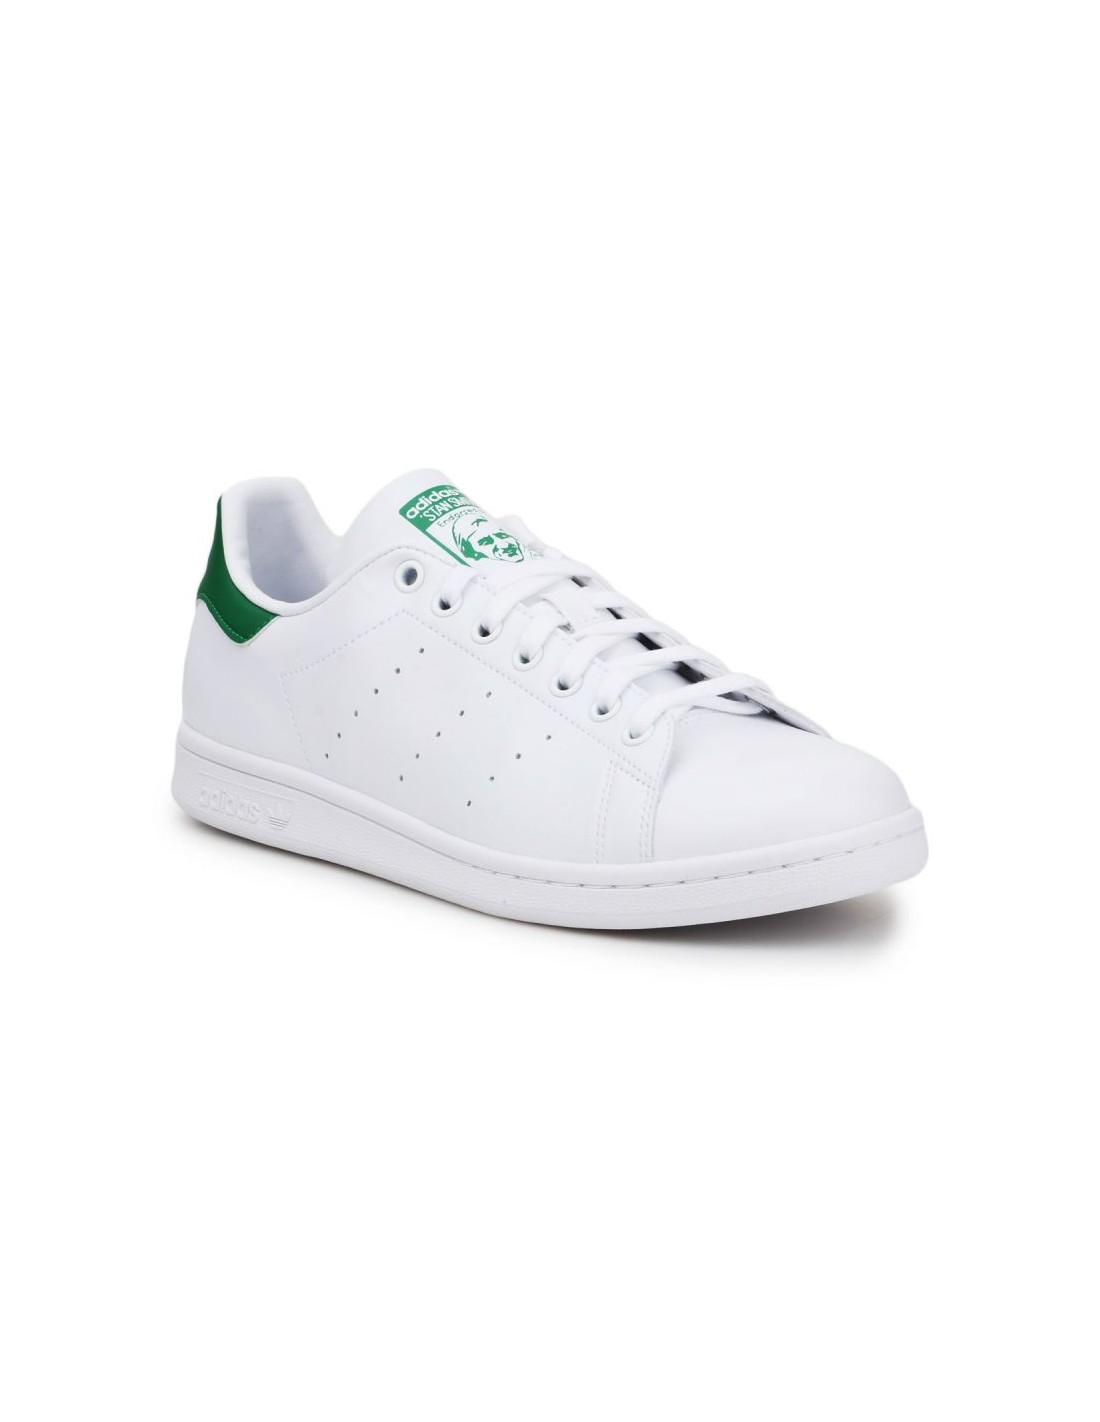 Adidas Stan Smith M FX5502 shoes